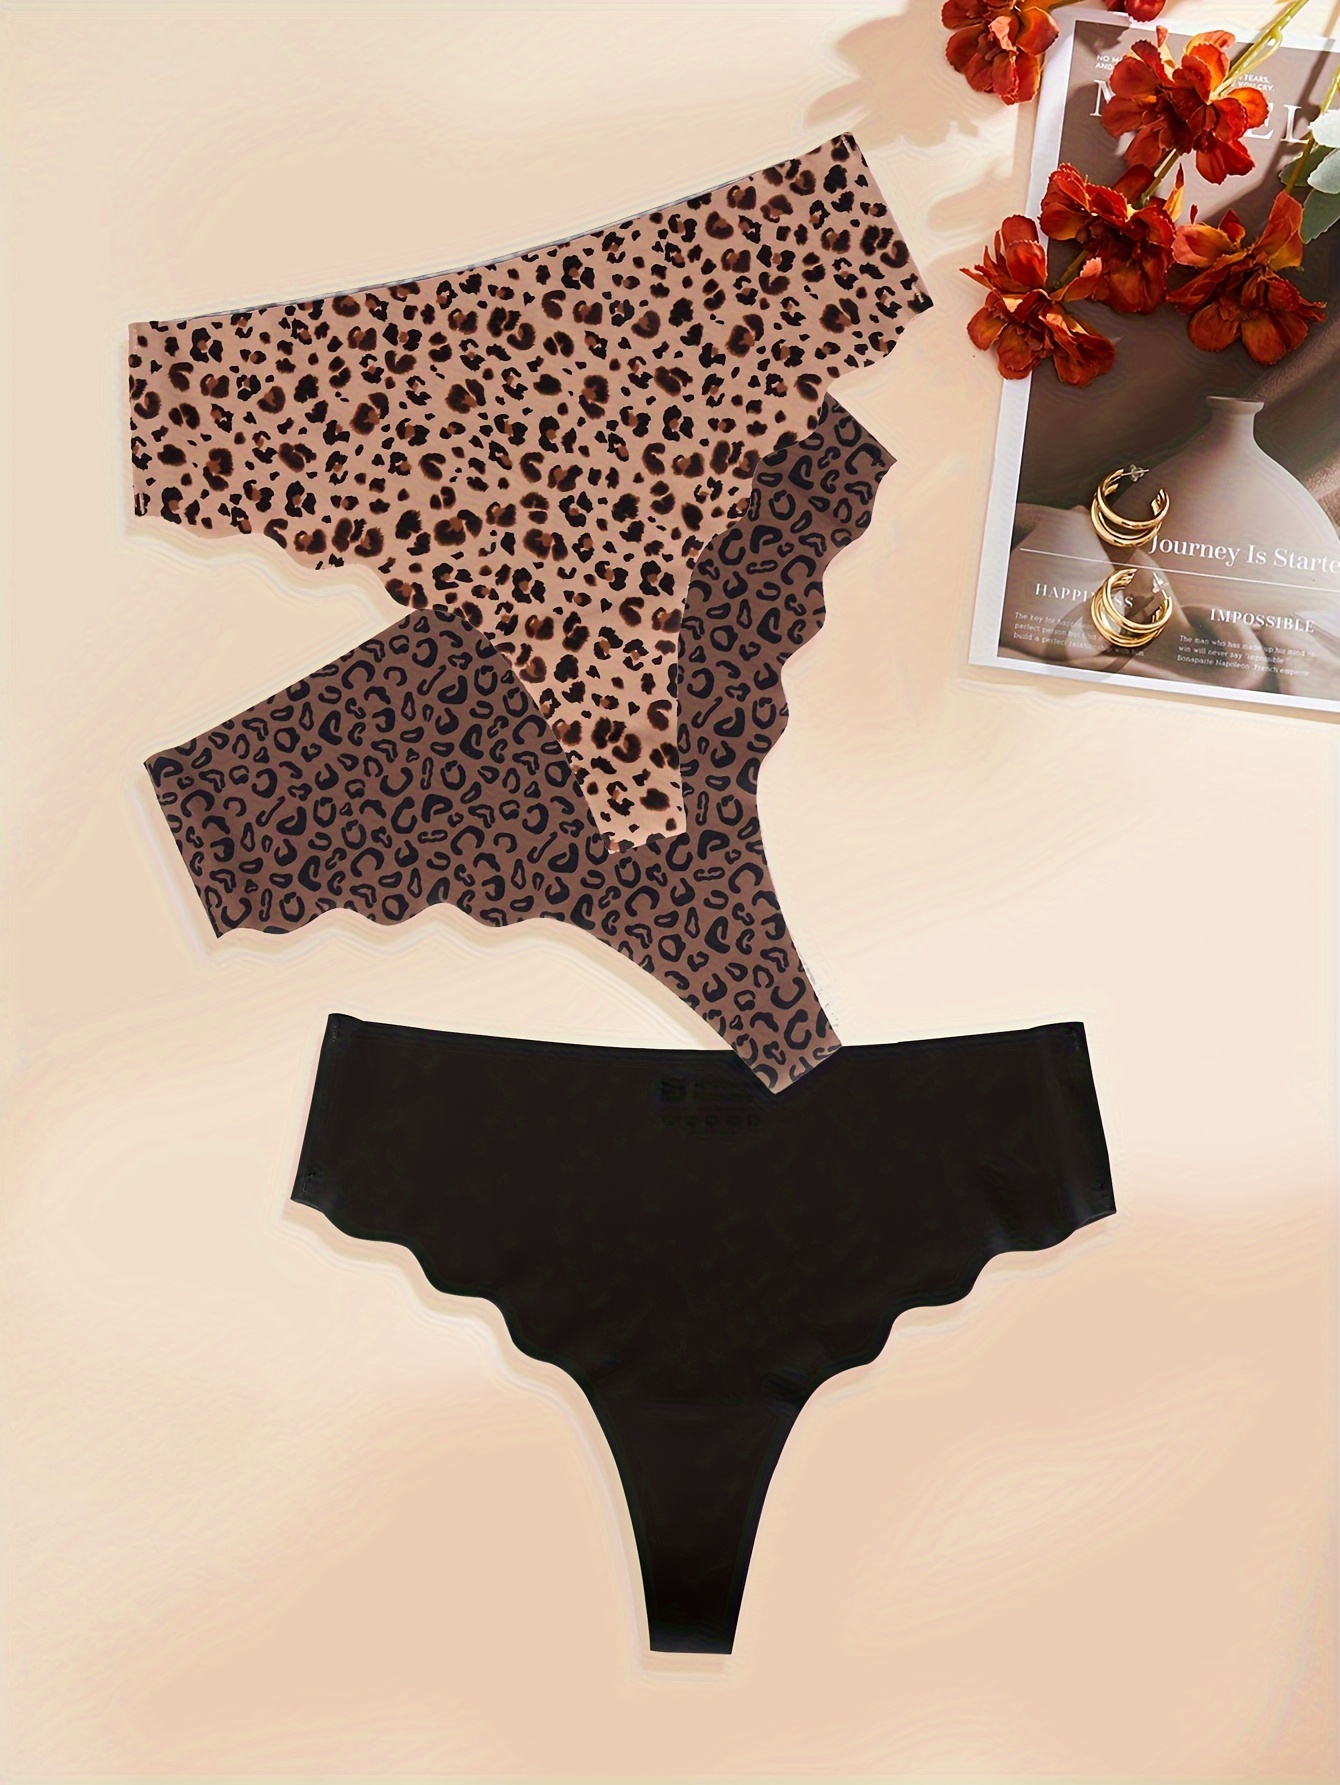 Stylish Leopard Print Brifs, High Waisted Breathable Fabric Intimates  Panties, Women's Lingerie & Underwear